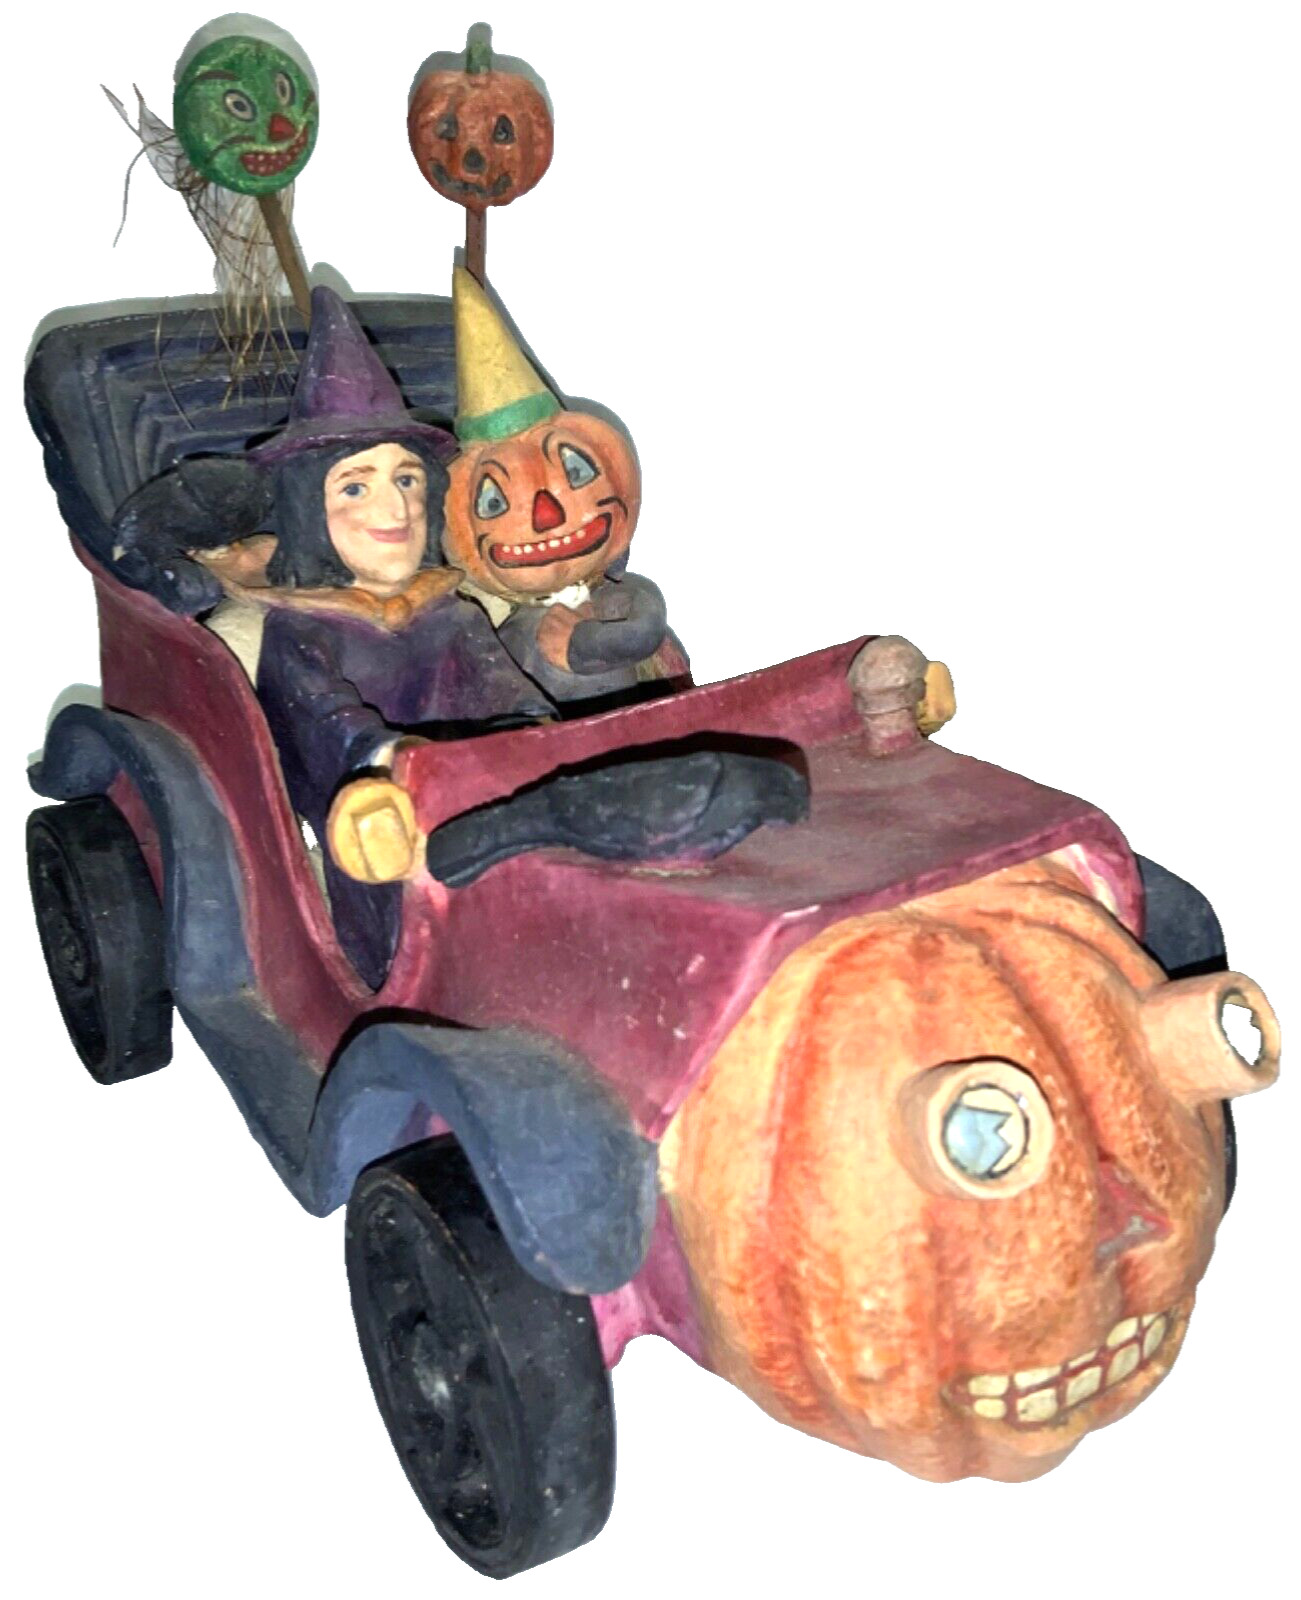 VINTAGE-STYLE ‘BETHANY LOWE’ HALLOWEEN - WITCH & JACK O’LANTERN CAR ‘AS IS’